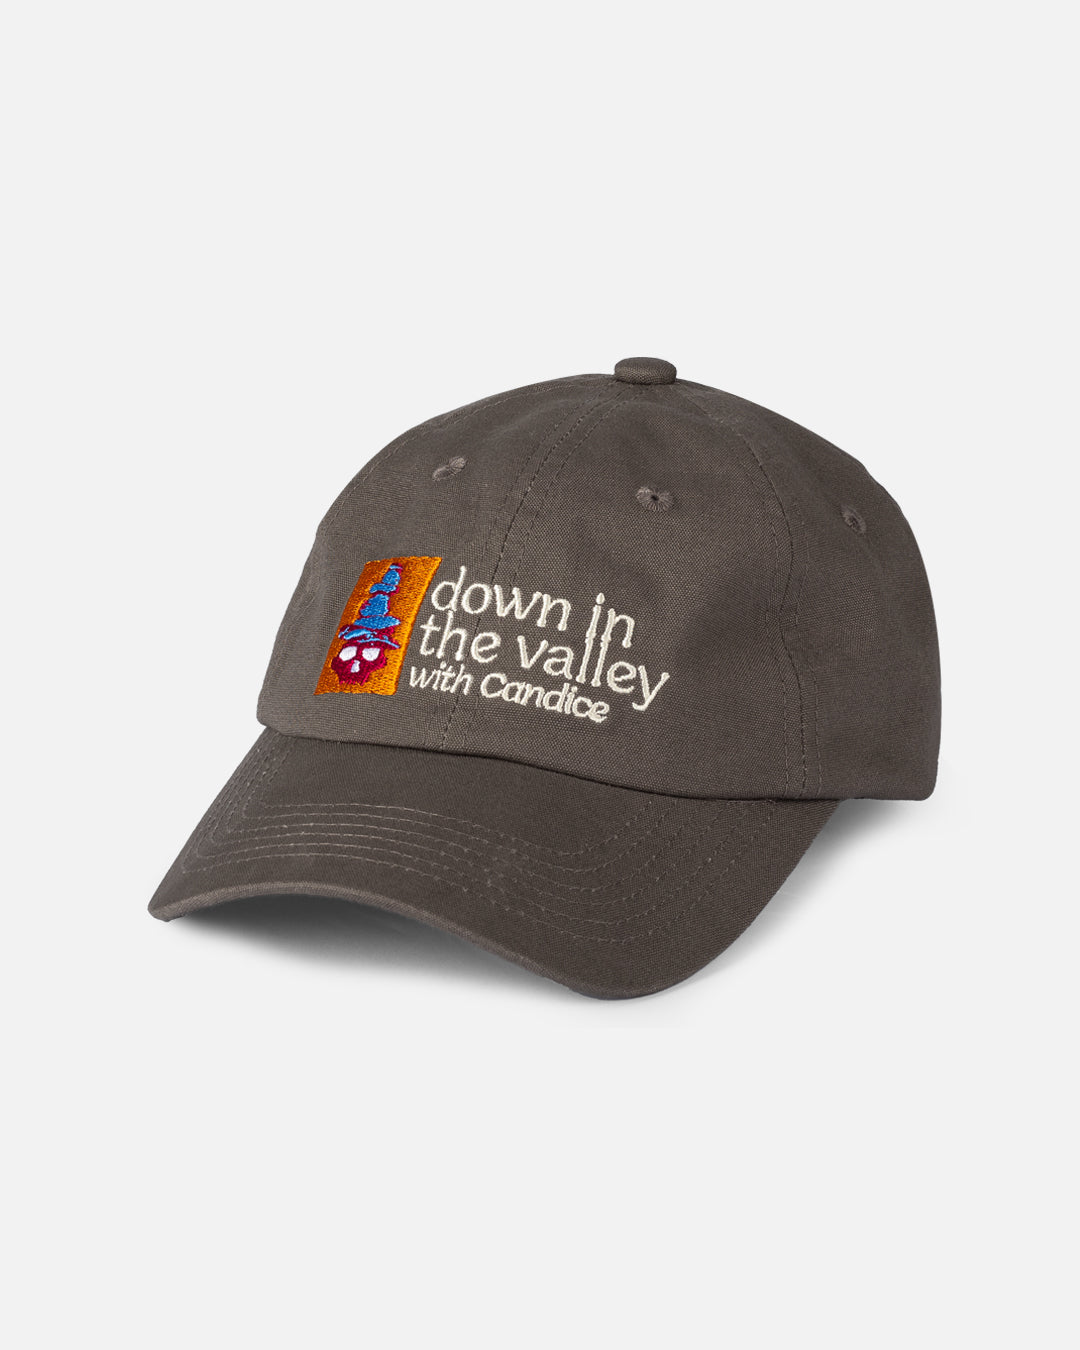 Down In The Valley 6 Panel Hat